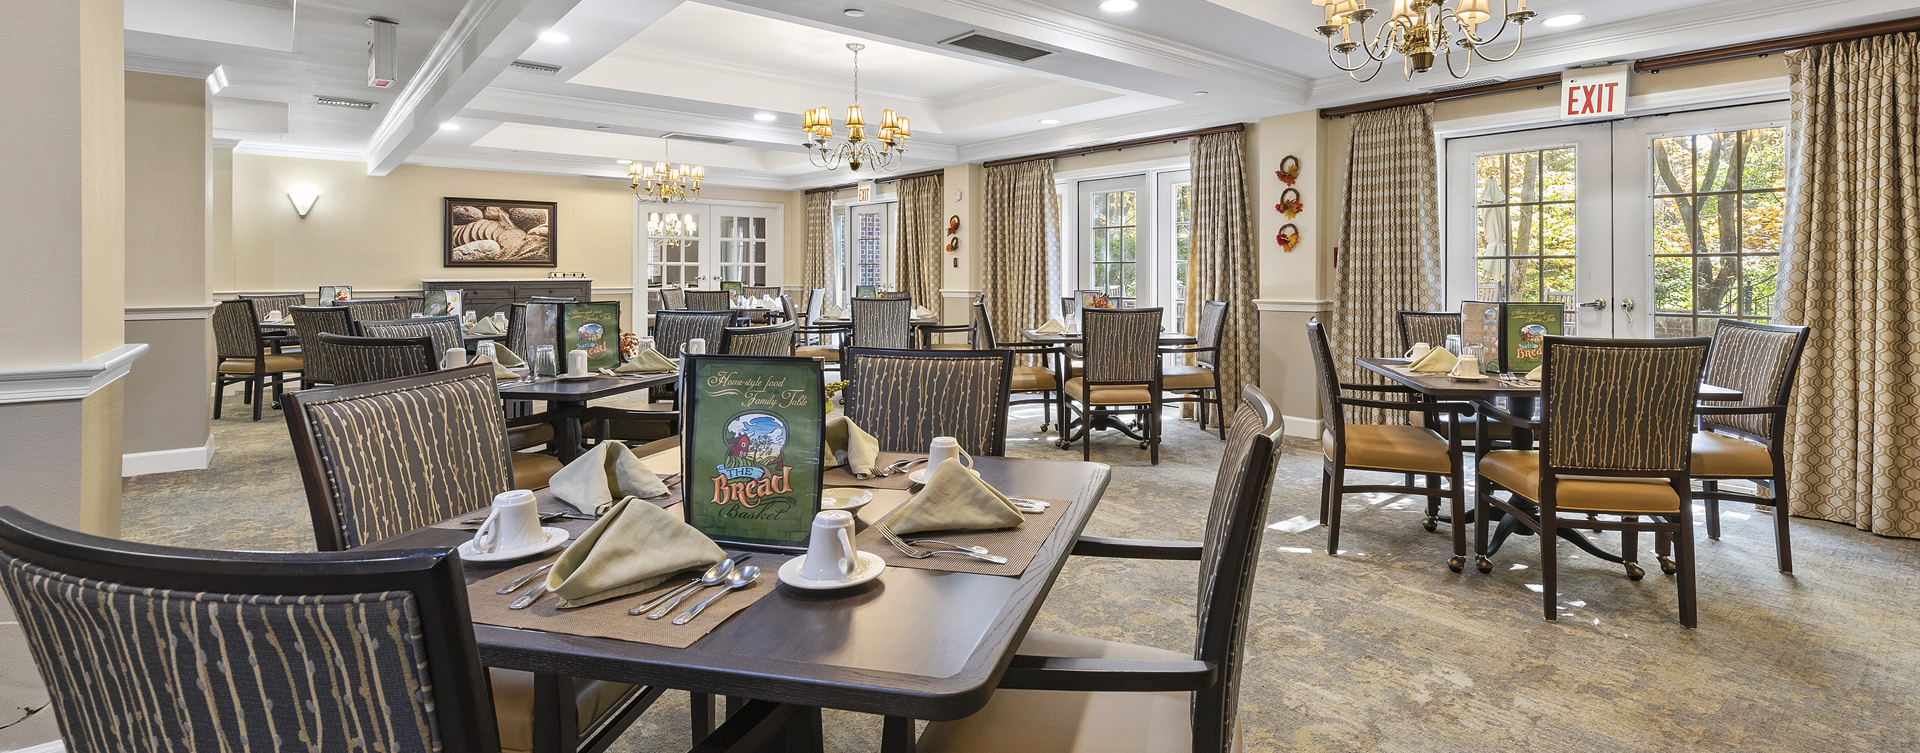 Enjoy homestyle food with made-from-scratch recipes in our dining room at Bickford of Worthington